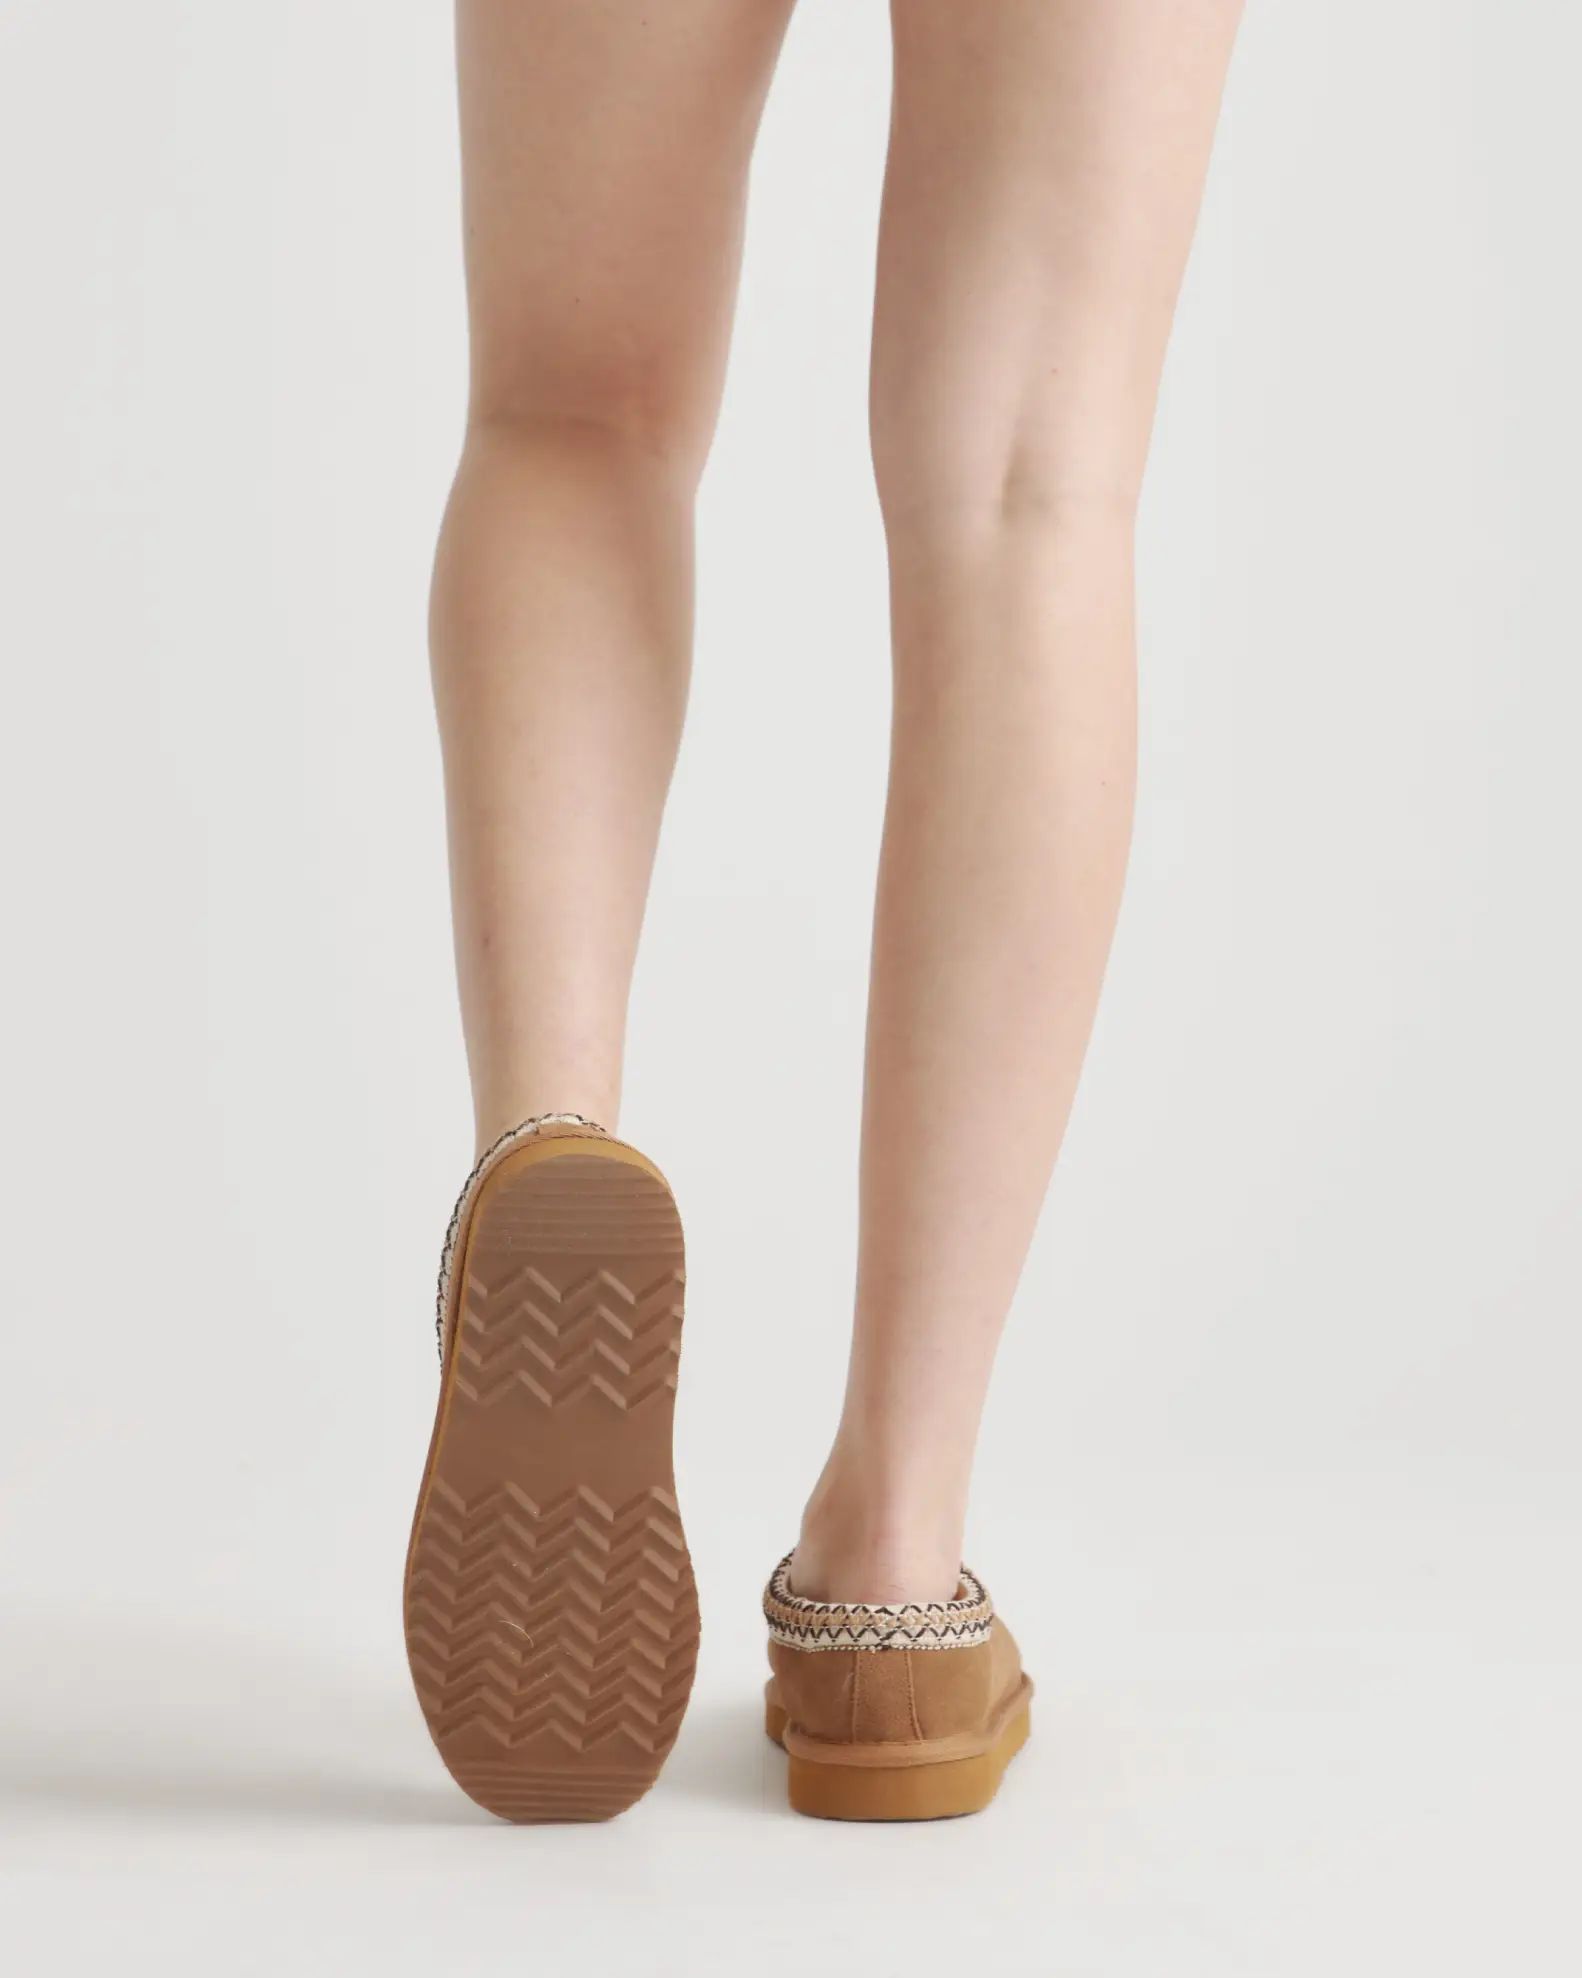 Australian Shearling Clog Slippers | Quince